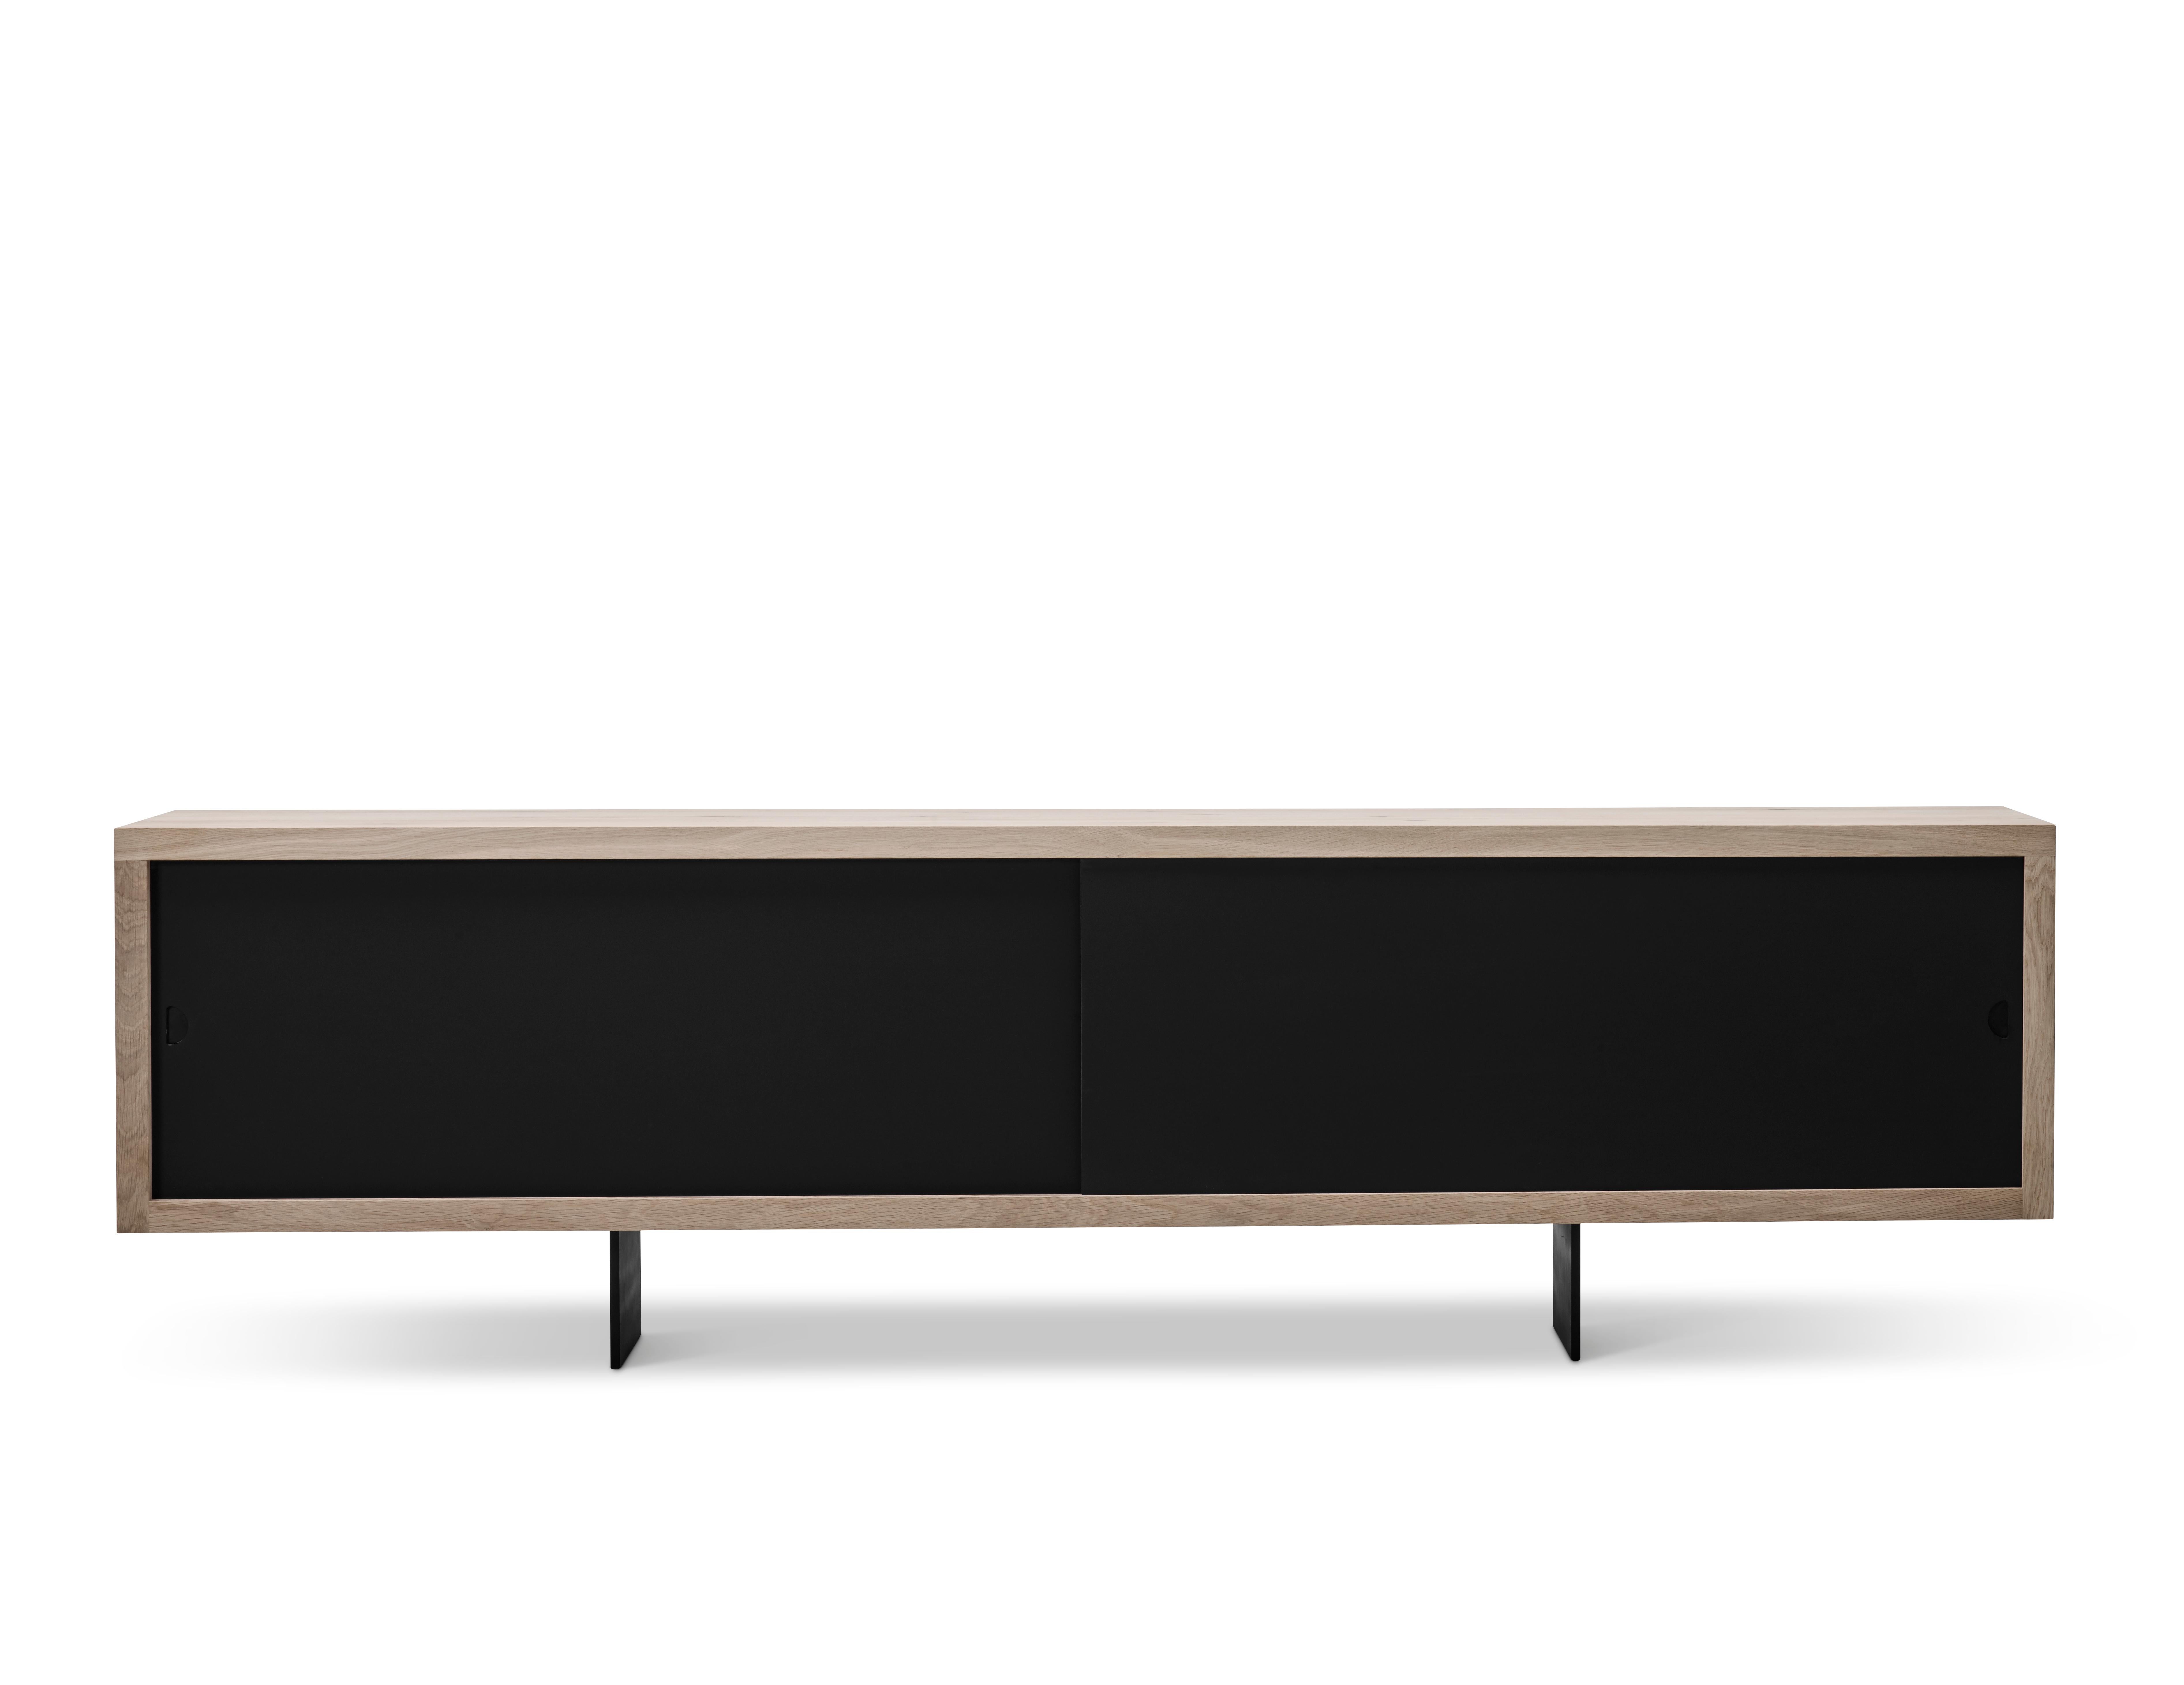 GRAND sideboard by Jacob Plejdrup for DK3, 2016

Sideboard with sliding doors, available in castoro, beige, black or white.
Dimensions: H 68 x 50 x 200

---
dk3 is known for the large plank tables, so it was obvious for designer and dk3